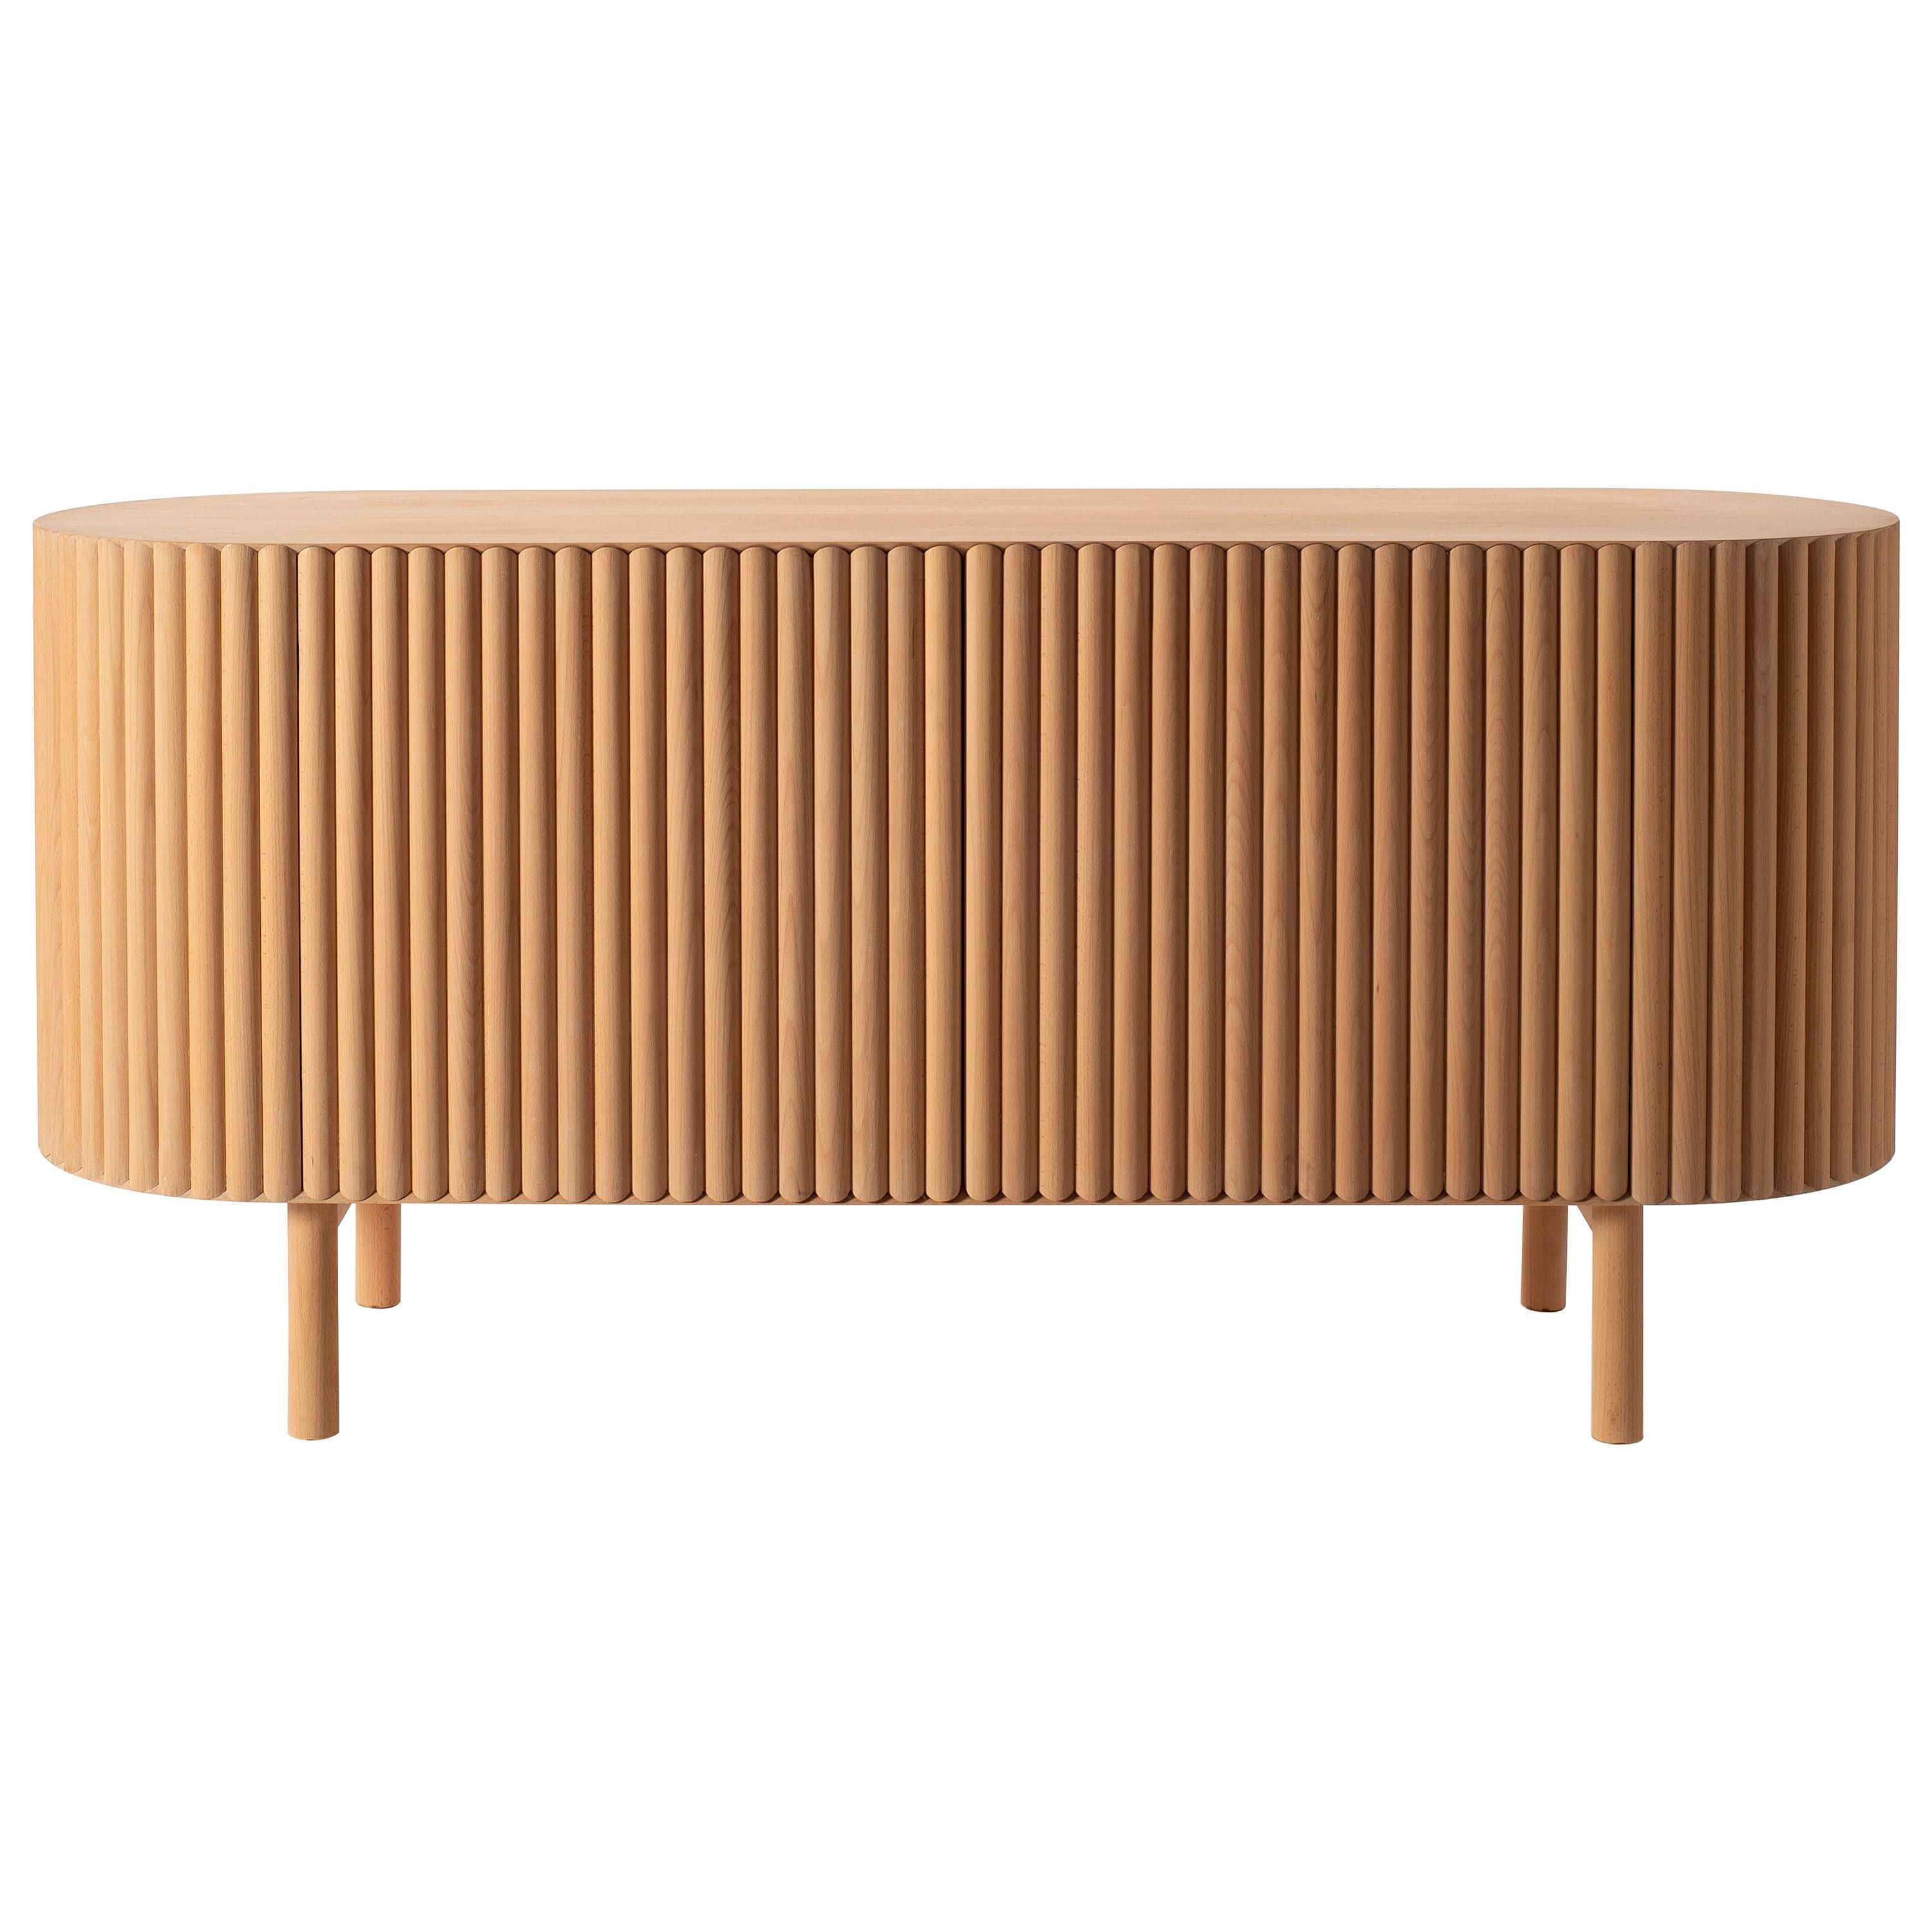 Rima Credenza | Whimsical In 2019 | Furniture, Modern In Current Stephen Credenzas (View 17 of 20)